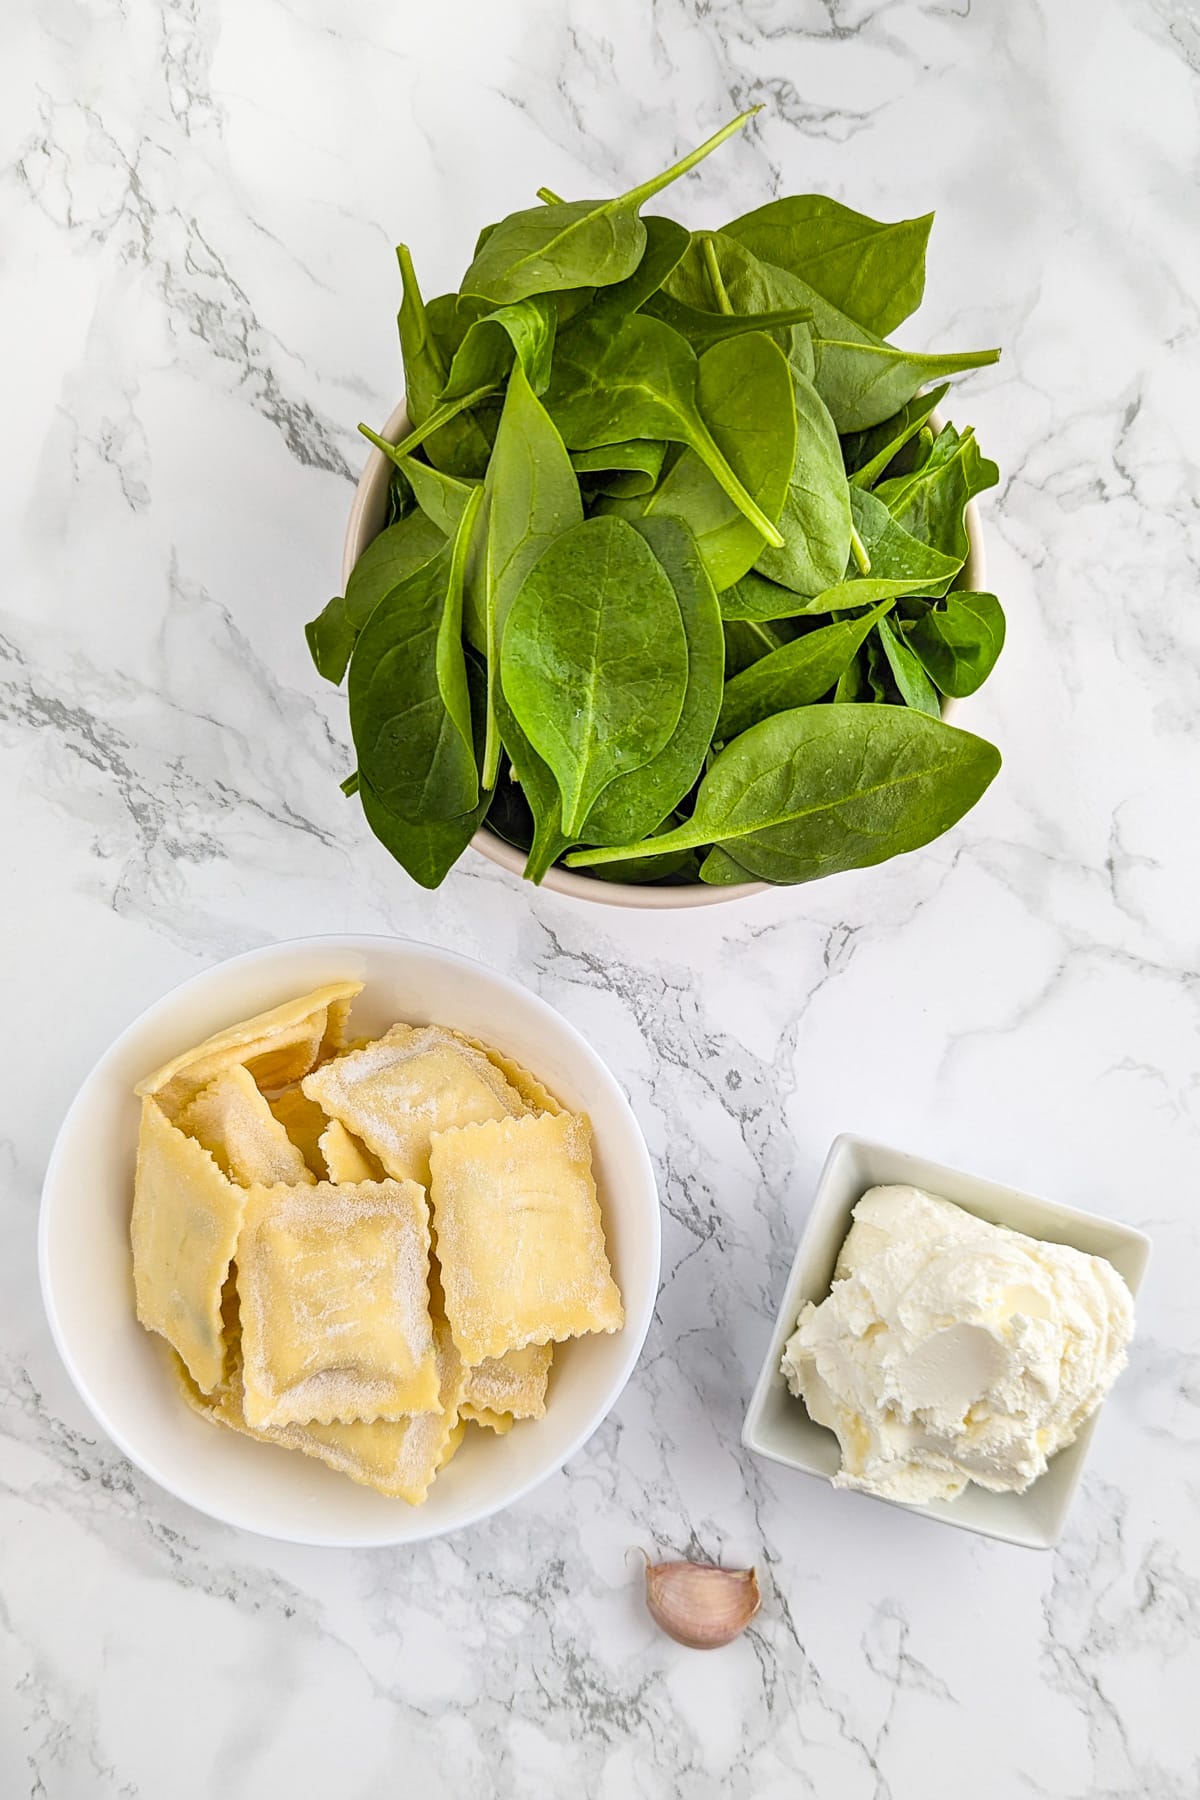 Spinach, cream cheese, garlic and ravioli on a white marble surface.